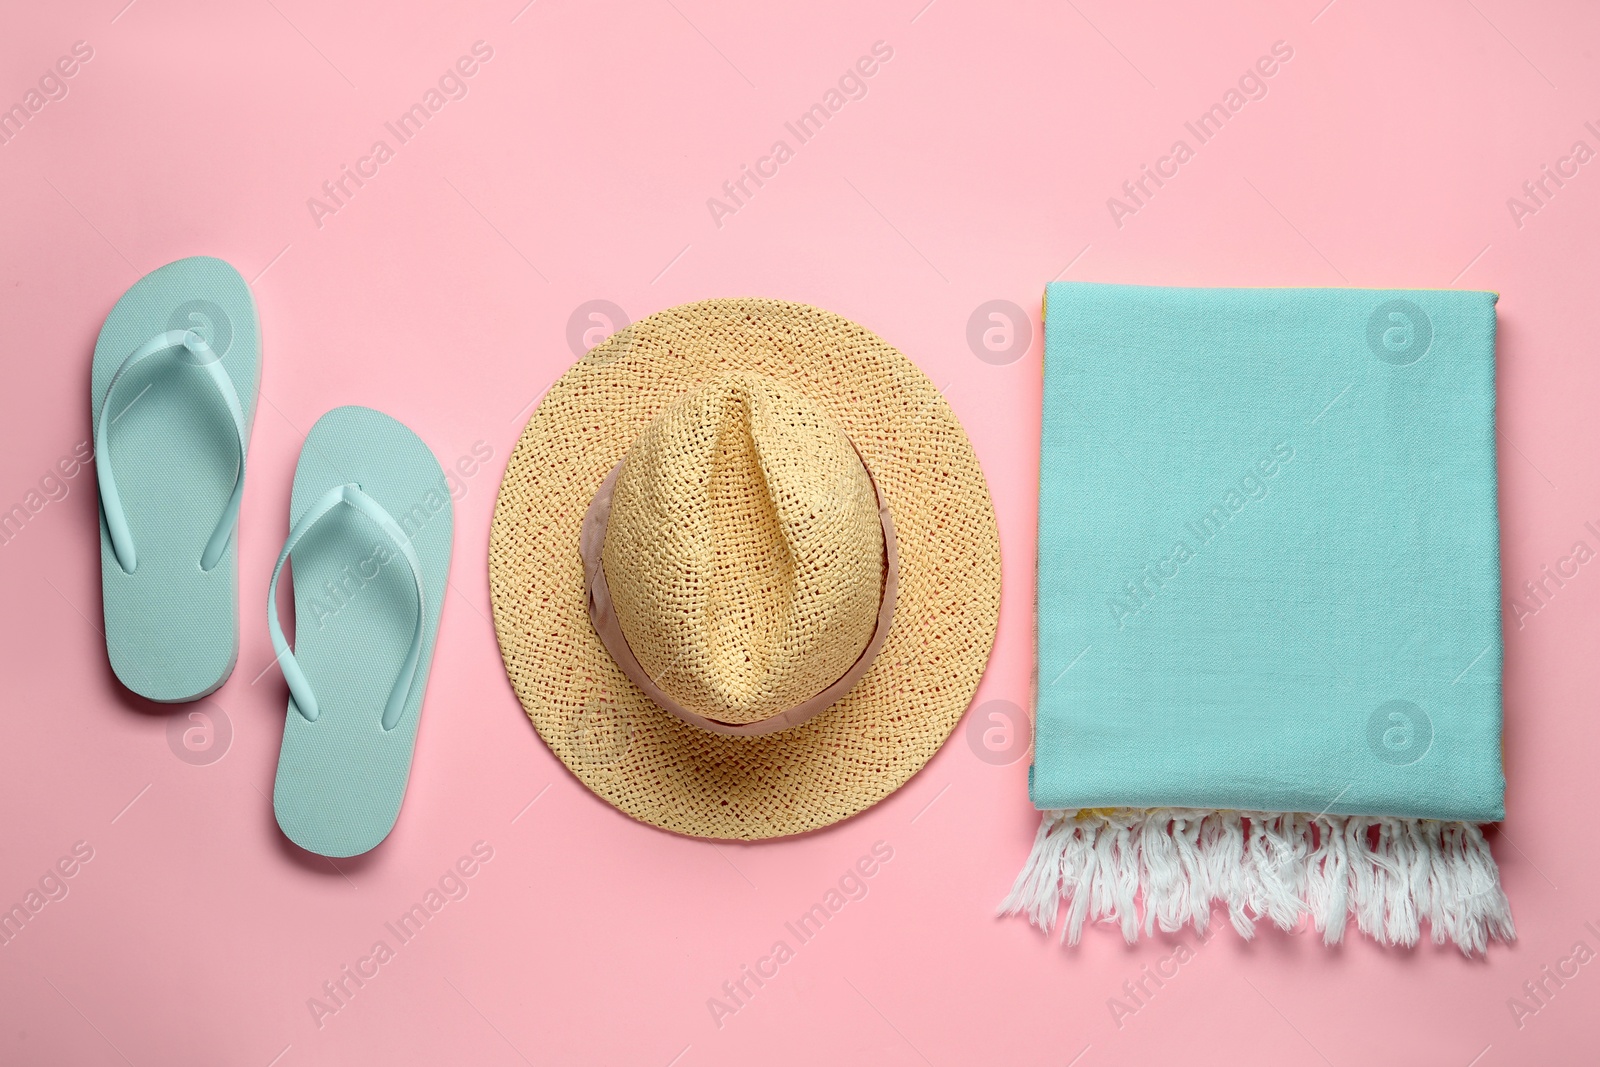 Photo of Beach towel, flip flops and straw hat on pink background, flat lay